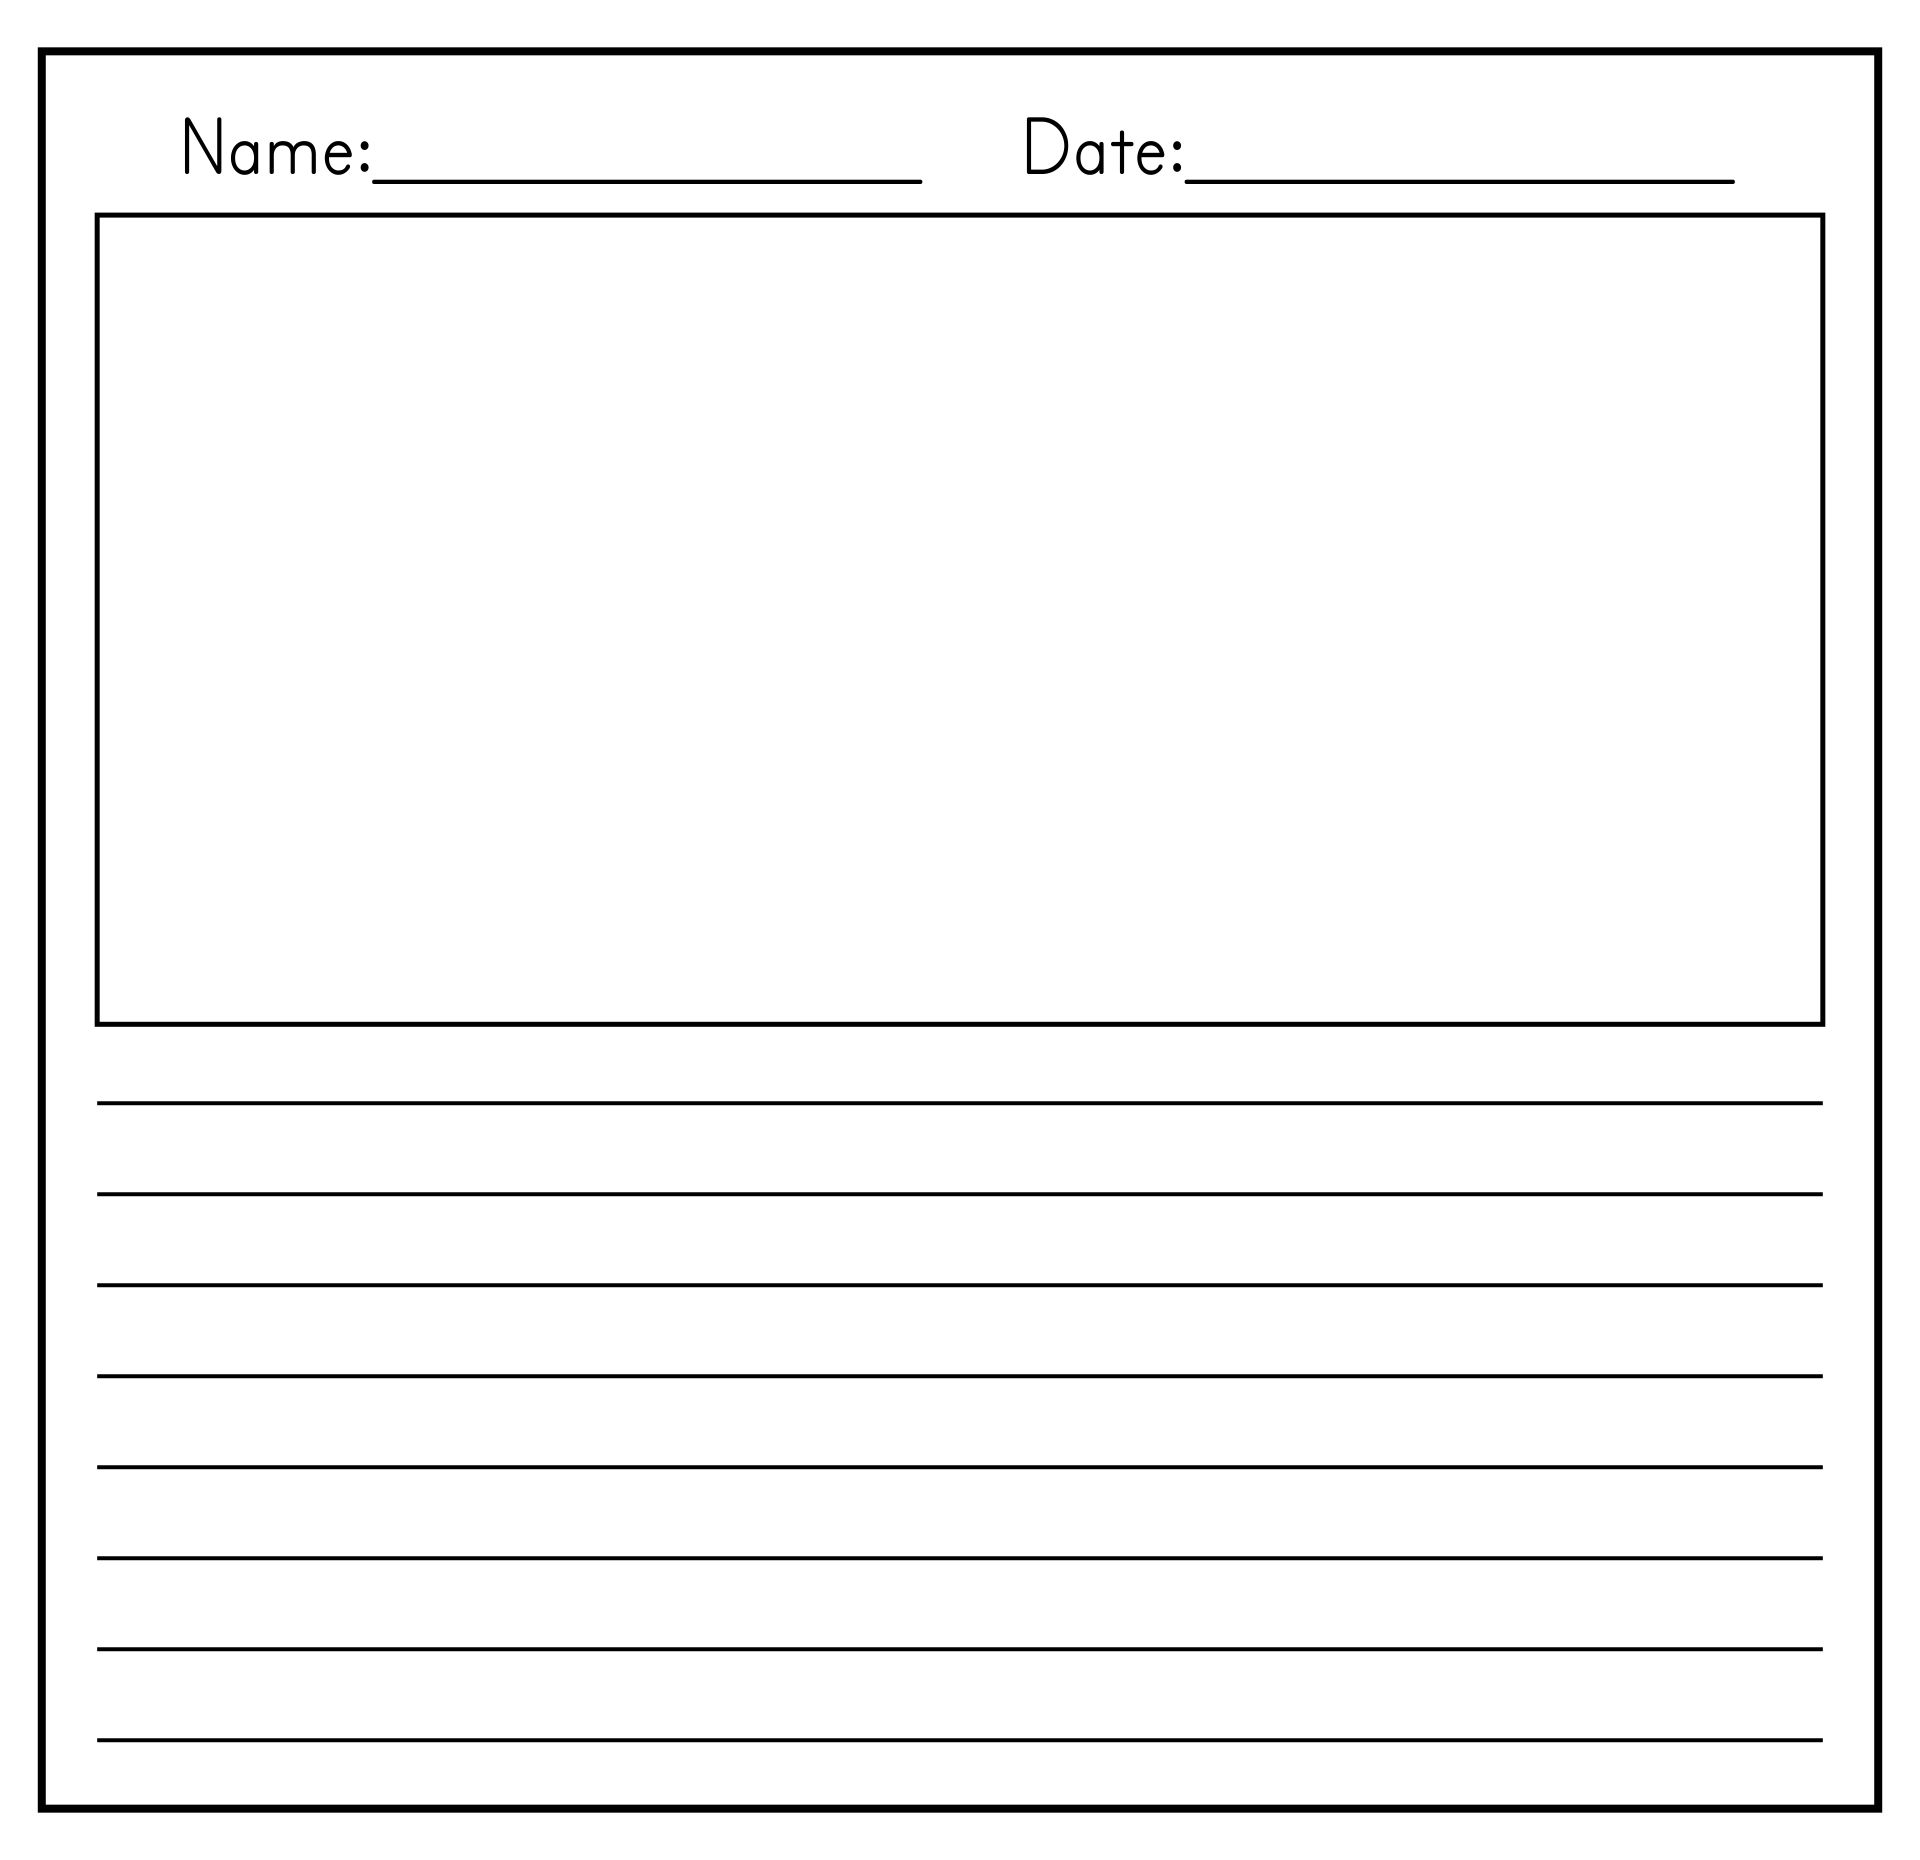 Lined Paper with Picture Box – Free Printable